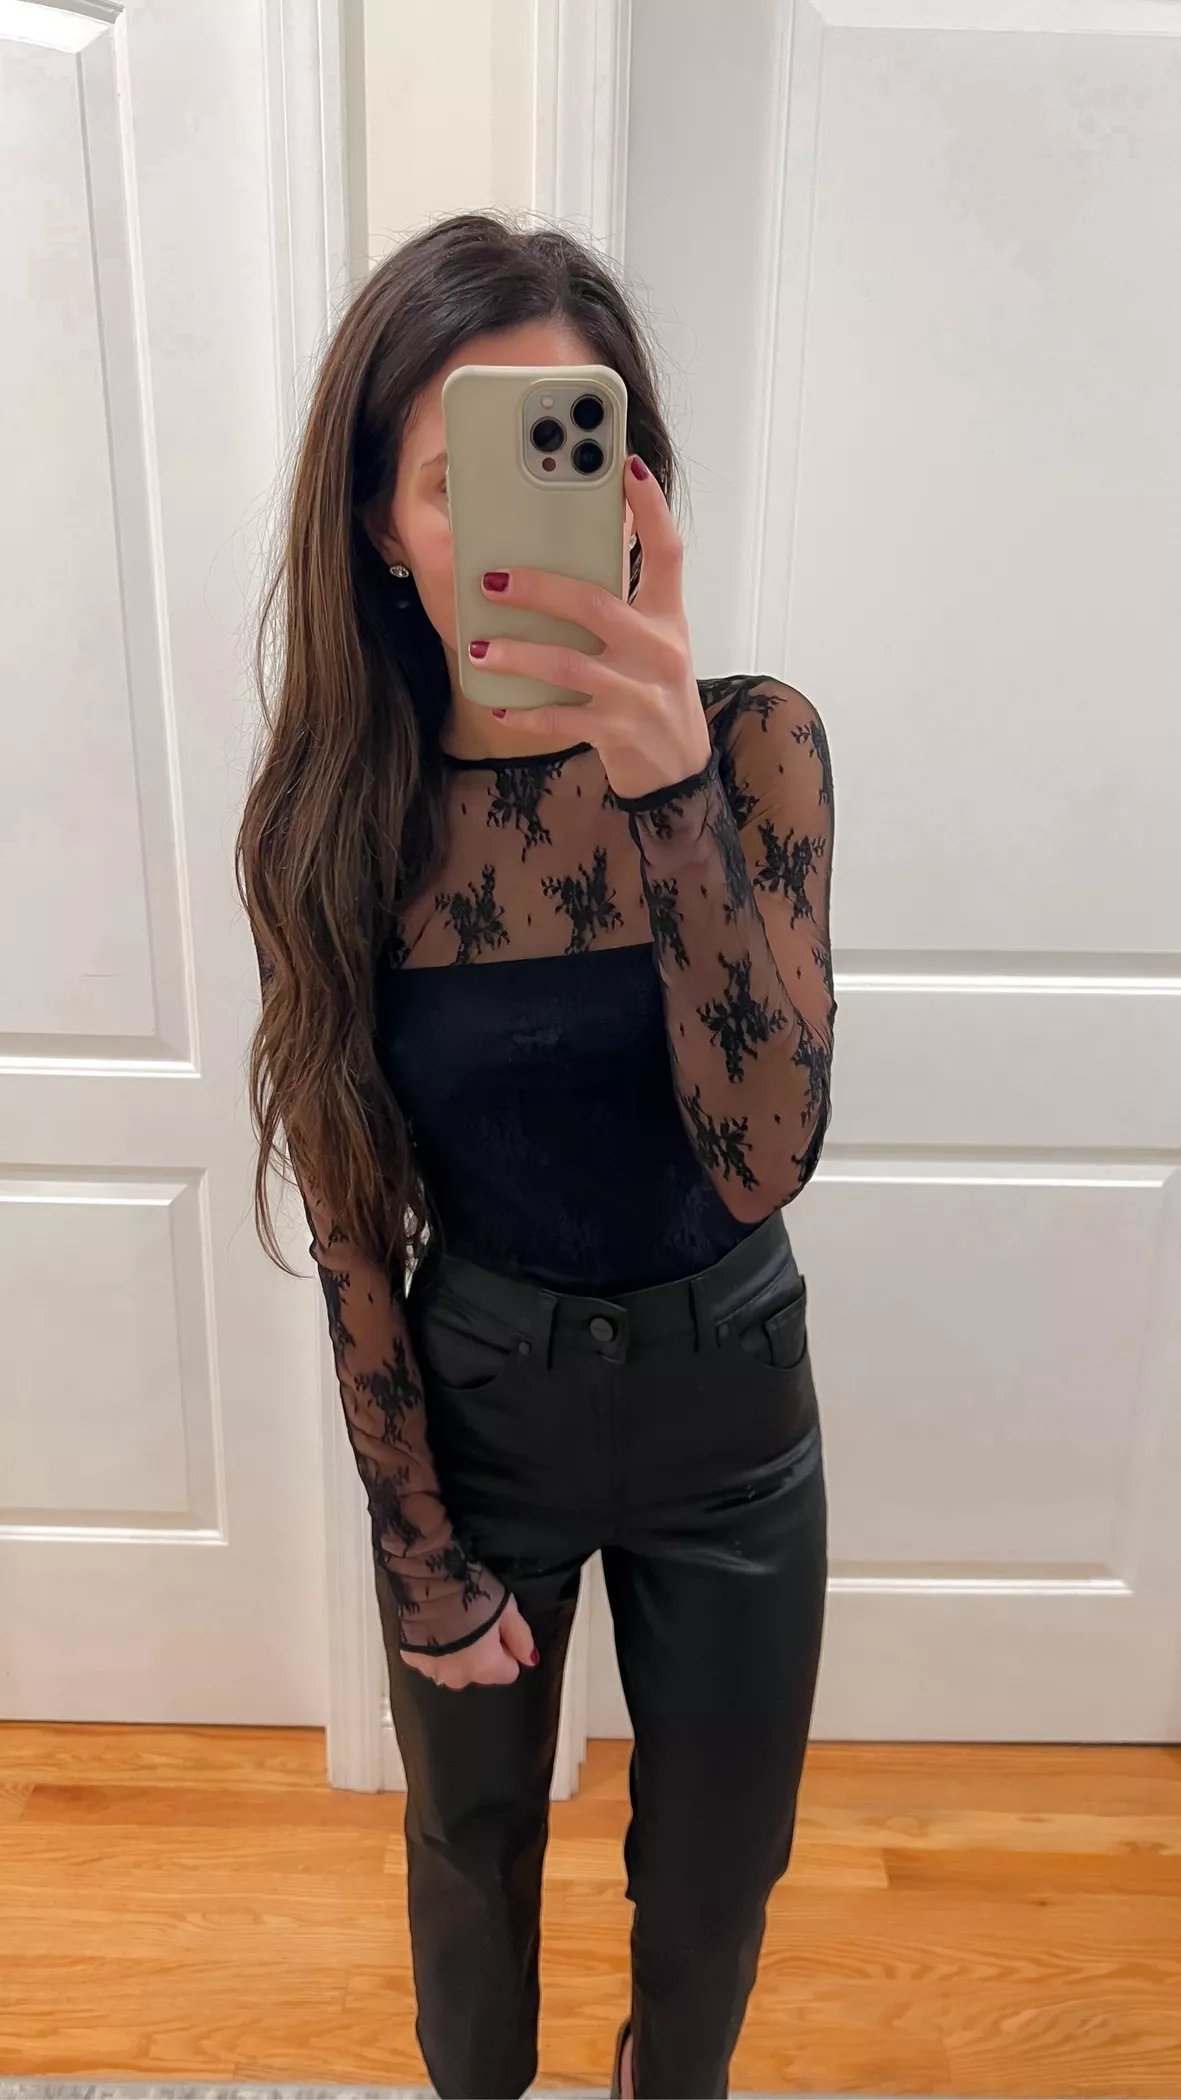 High waist jeans and a lace bodysuit.